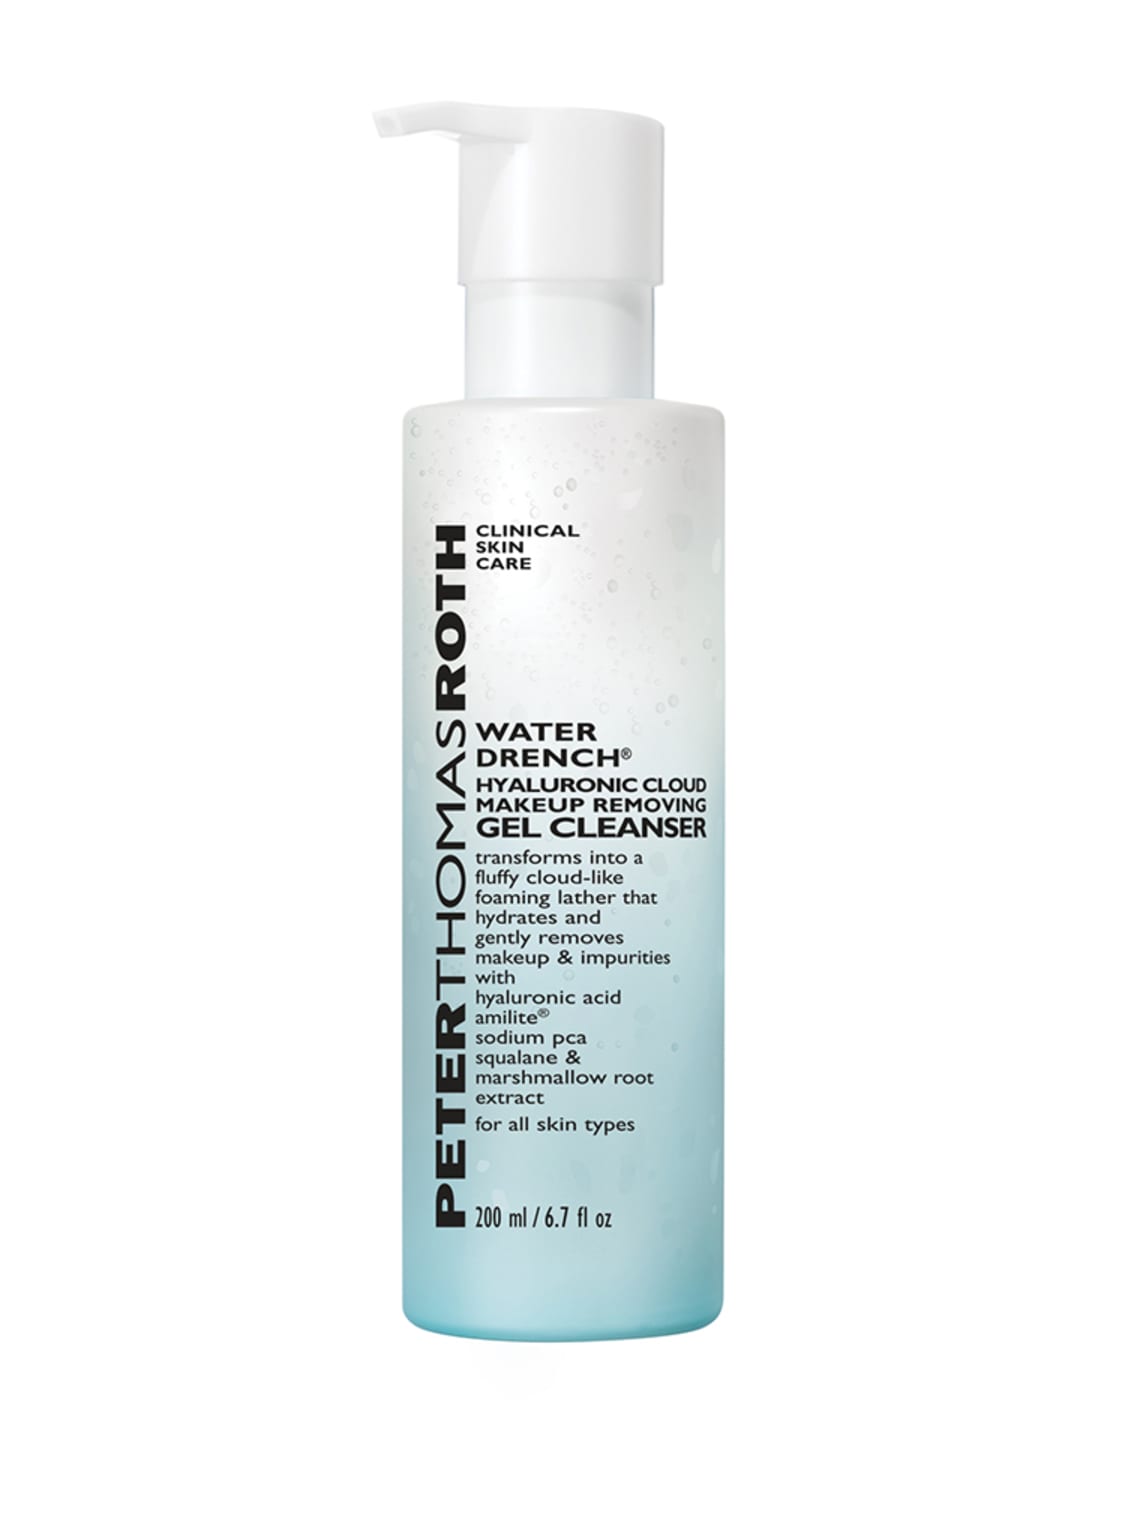 Peter Thomas Roth Water Drench Hyaluronic Cloud Make Up Remover 200 ml von PETER THOMAS ROTH